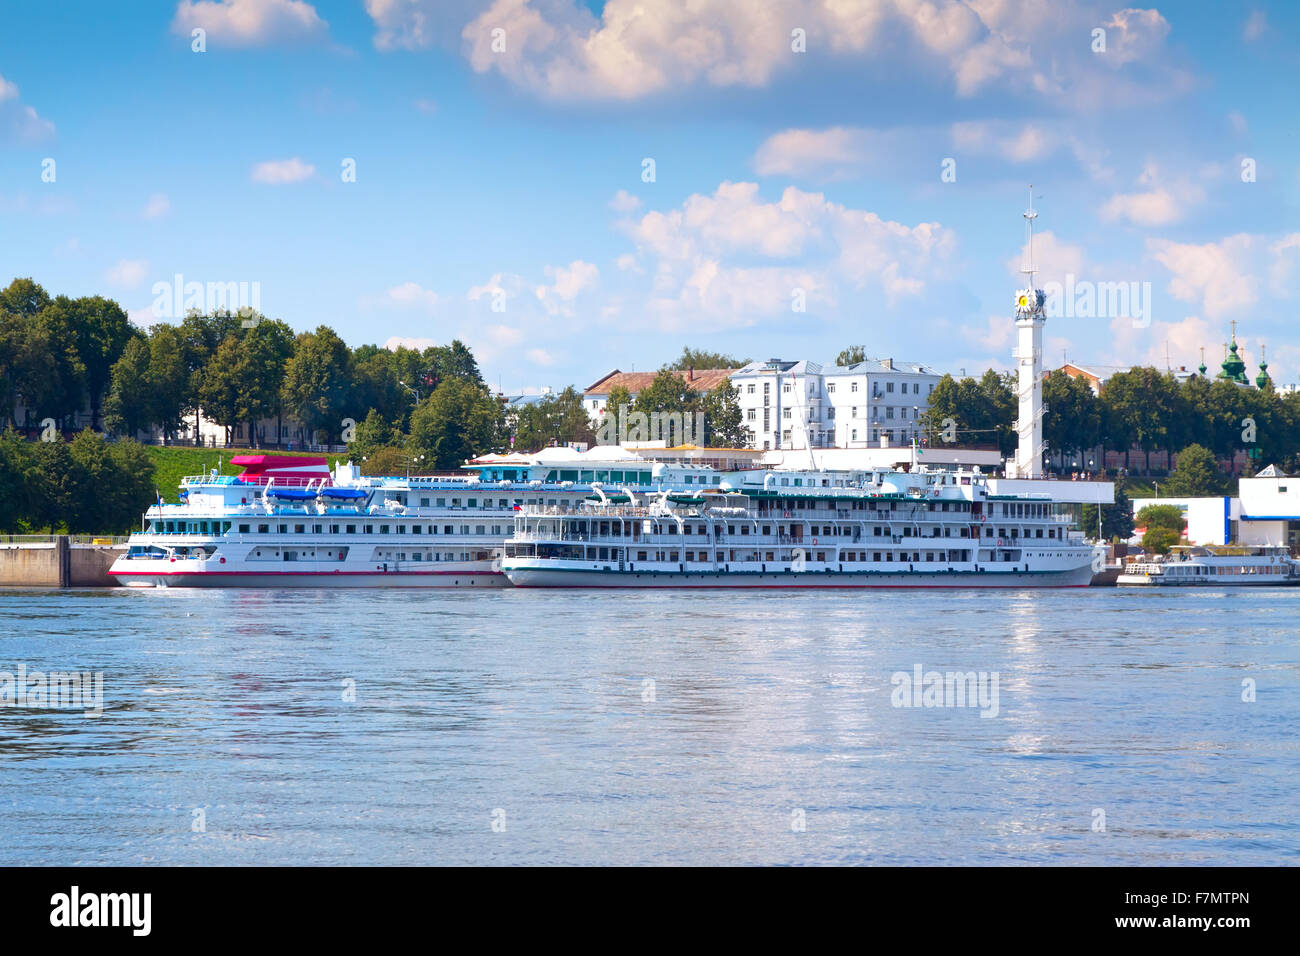 Ships of the moored at the Yaroslavl river station Stock Photo